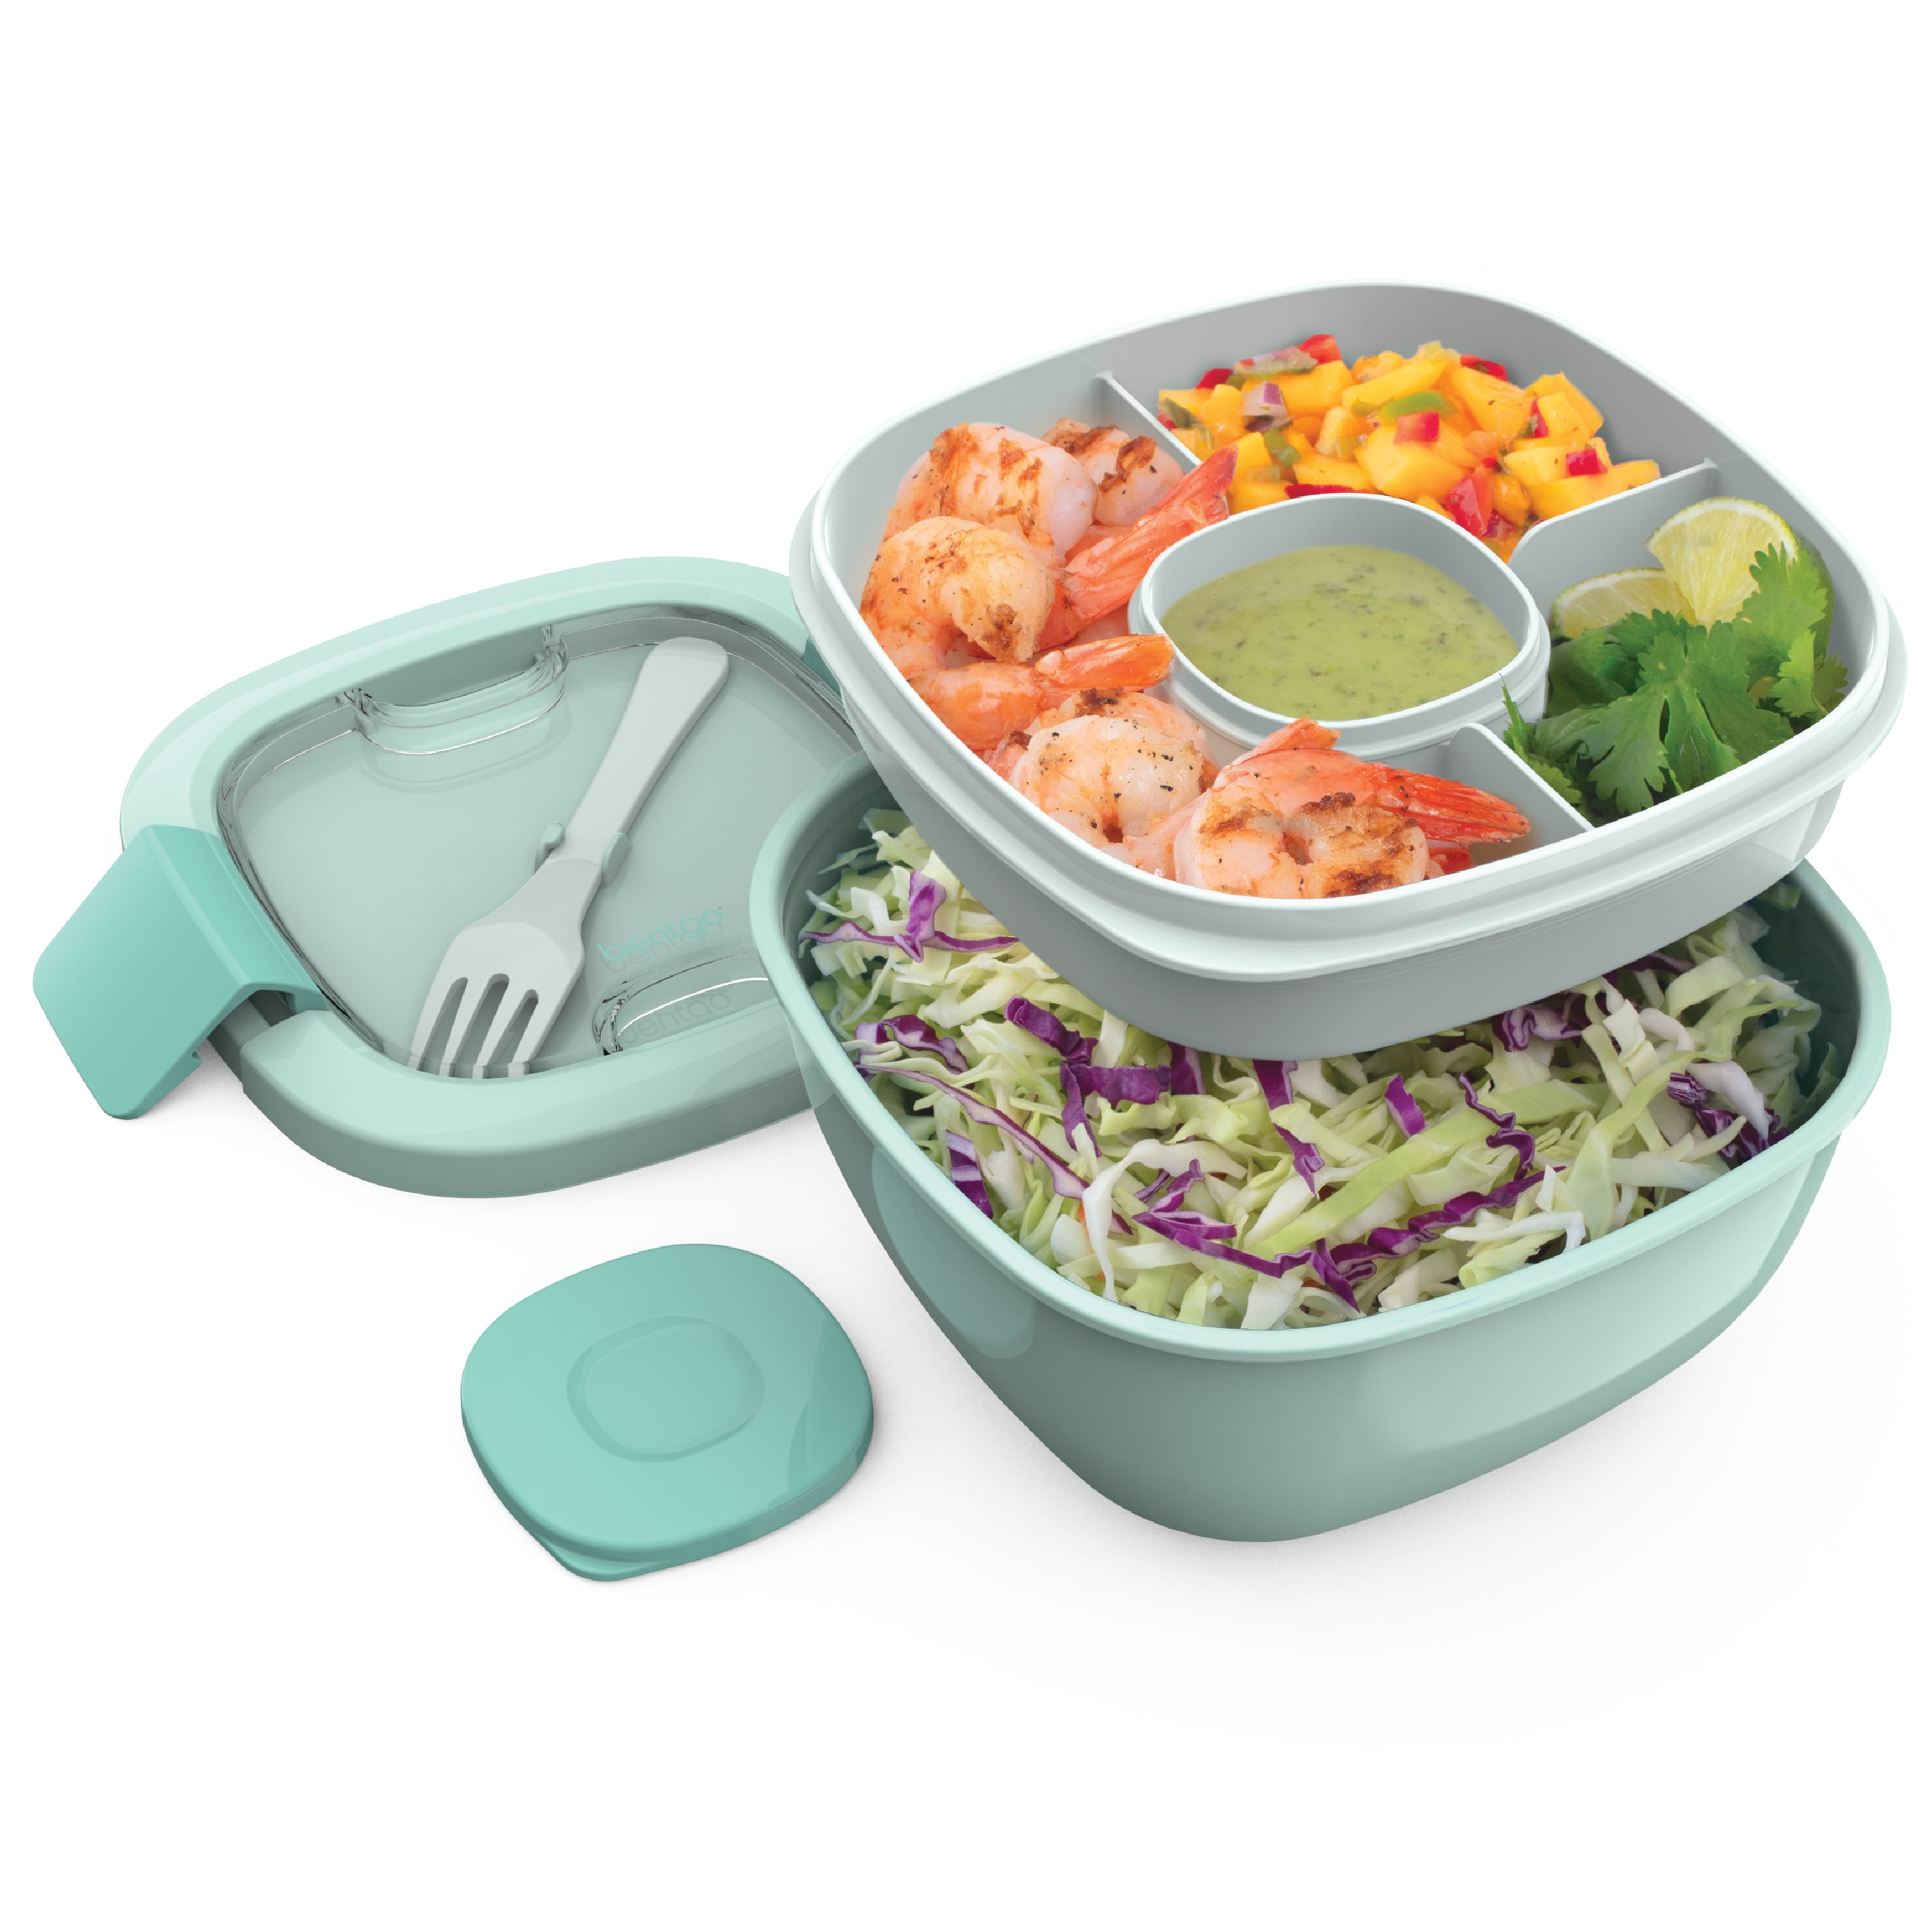  kinsho Bento Salad Container, Lunch Bowl for Salads, Bento  Lunch-Box Containers with Lid for Adults, Meal Prep Kit for Lunches To Go, Leakproof Dressing Cup